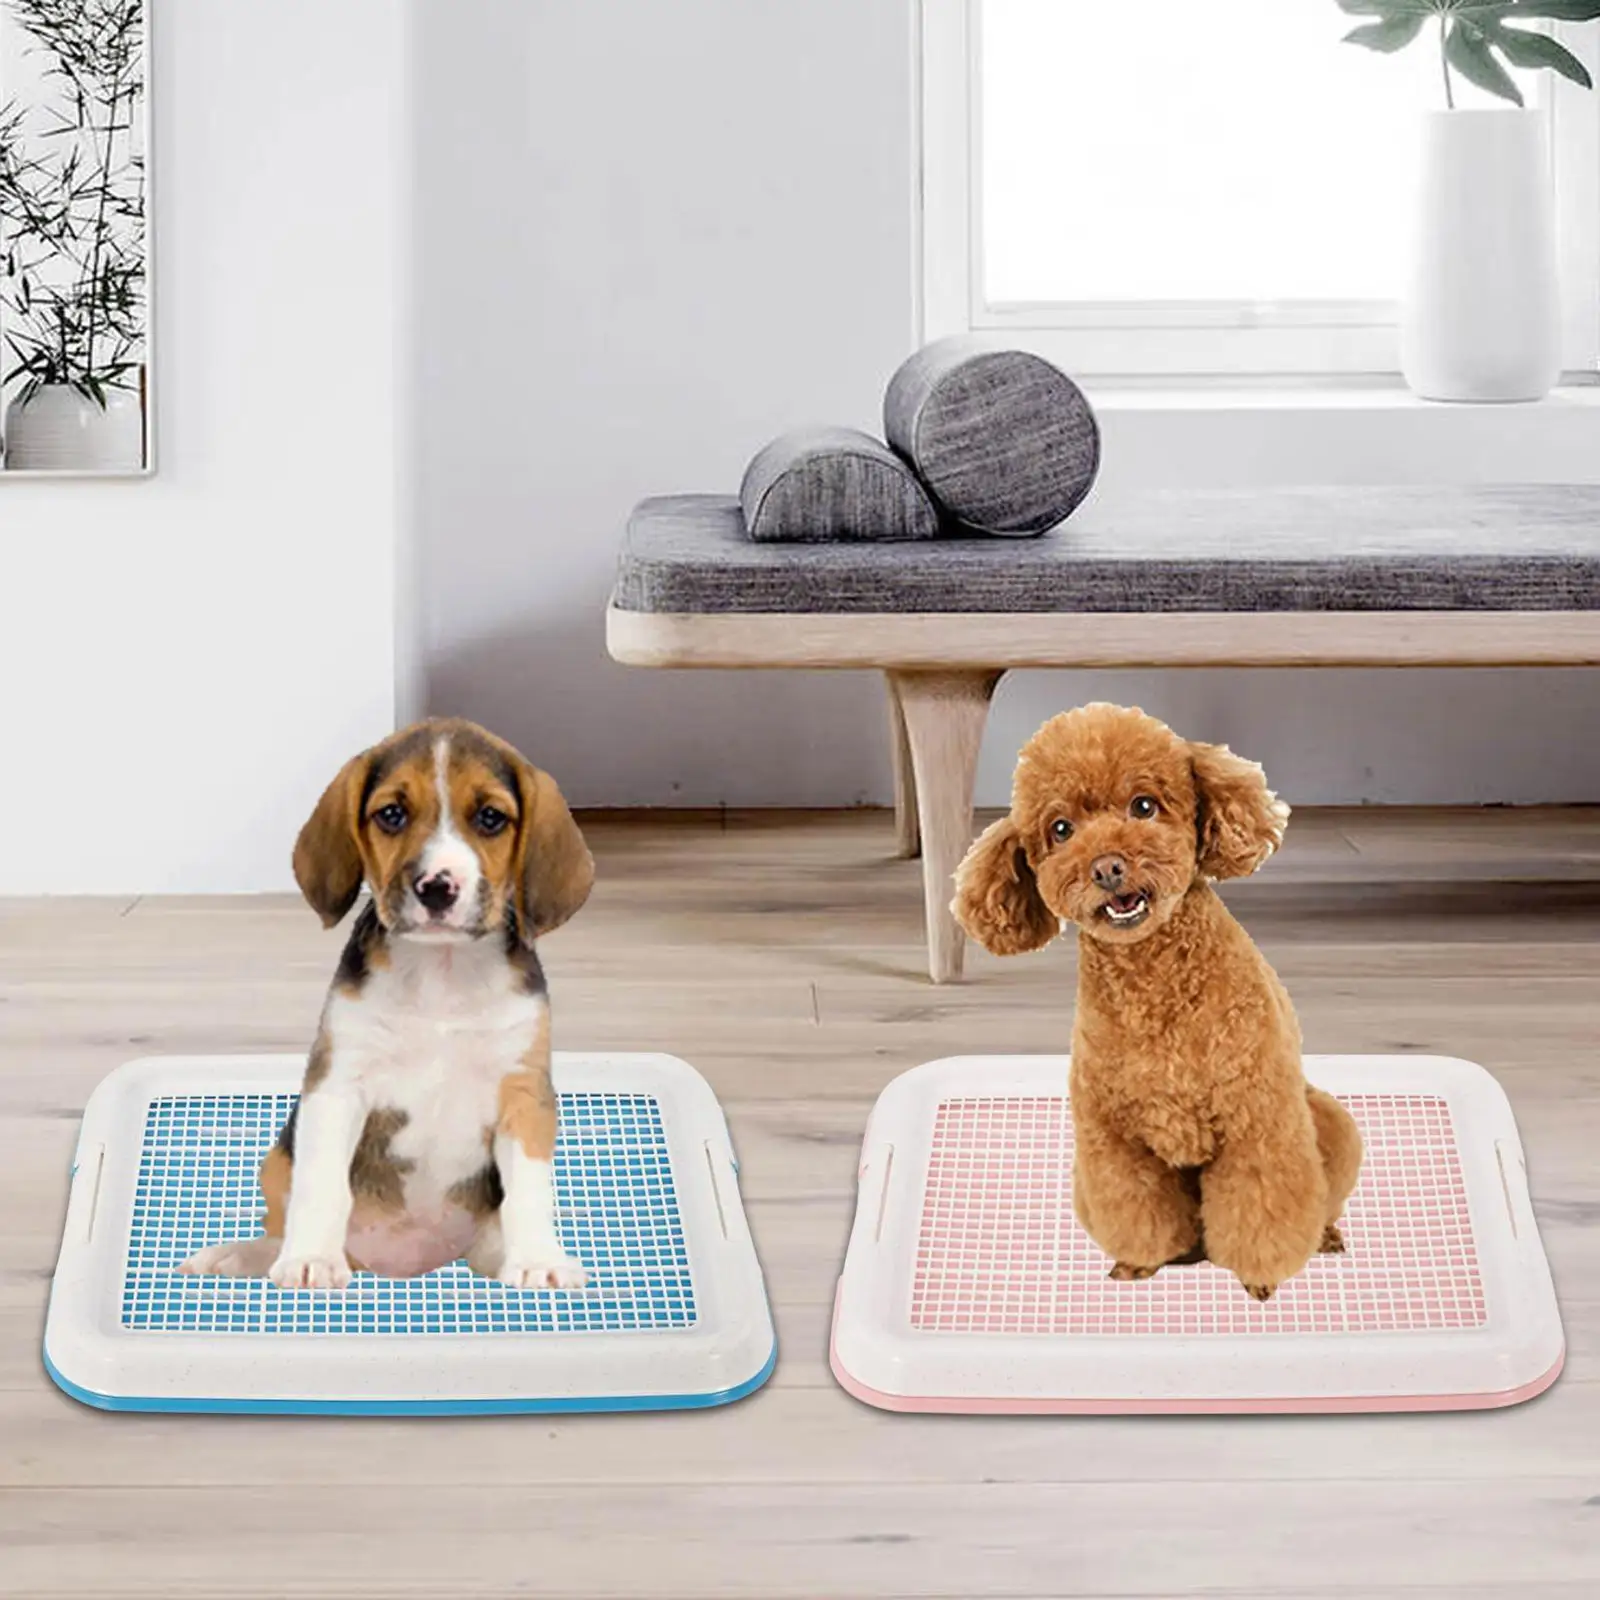 Dog Potty Toilet Training Tray Indoor Outdoor Removable Easy to Clean Anti Slip Dog Potty Tray Toilet for Puppies Small Dogs